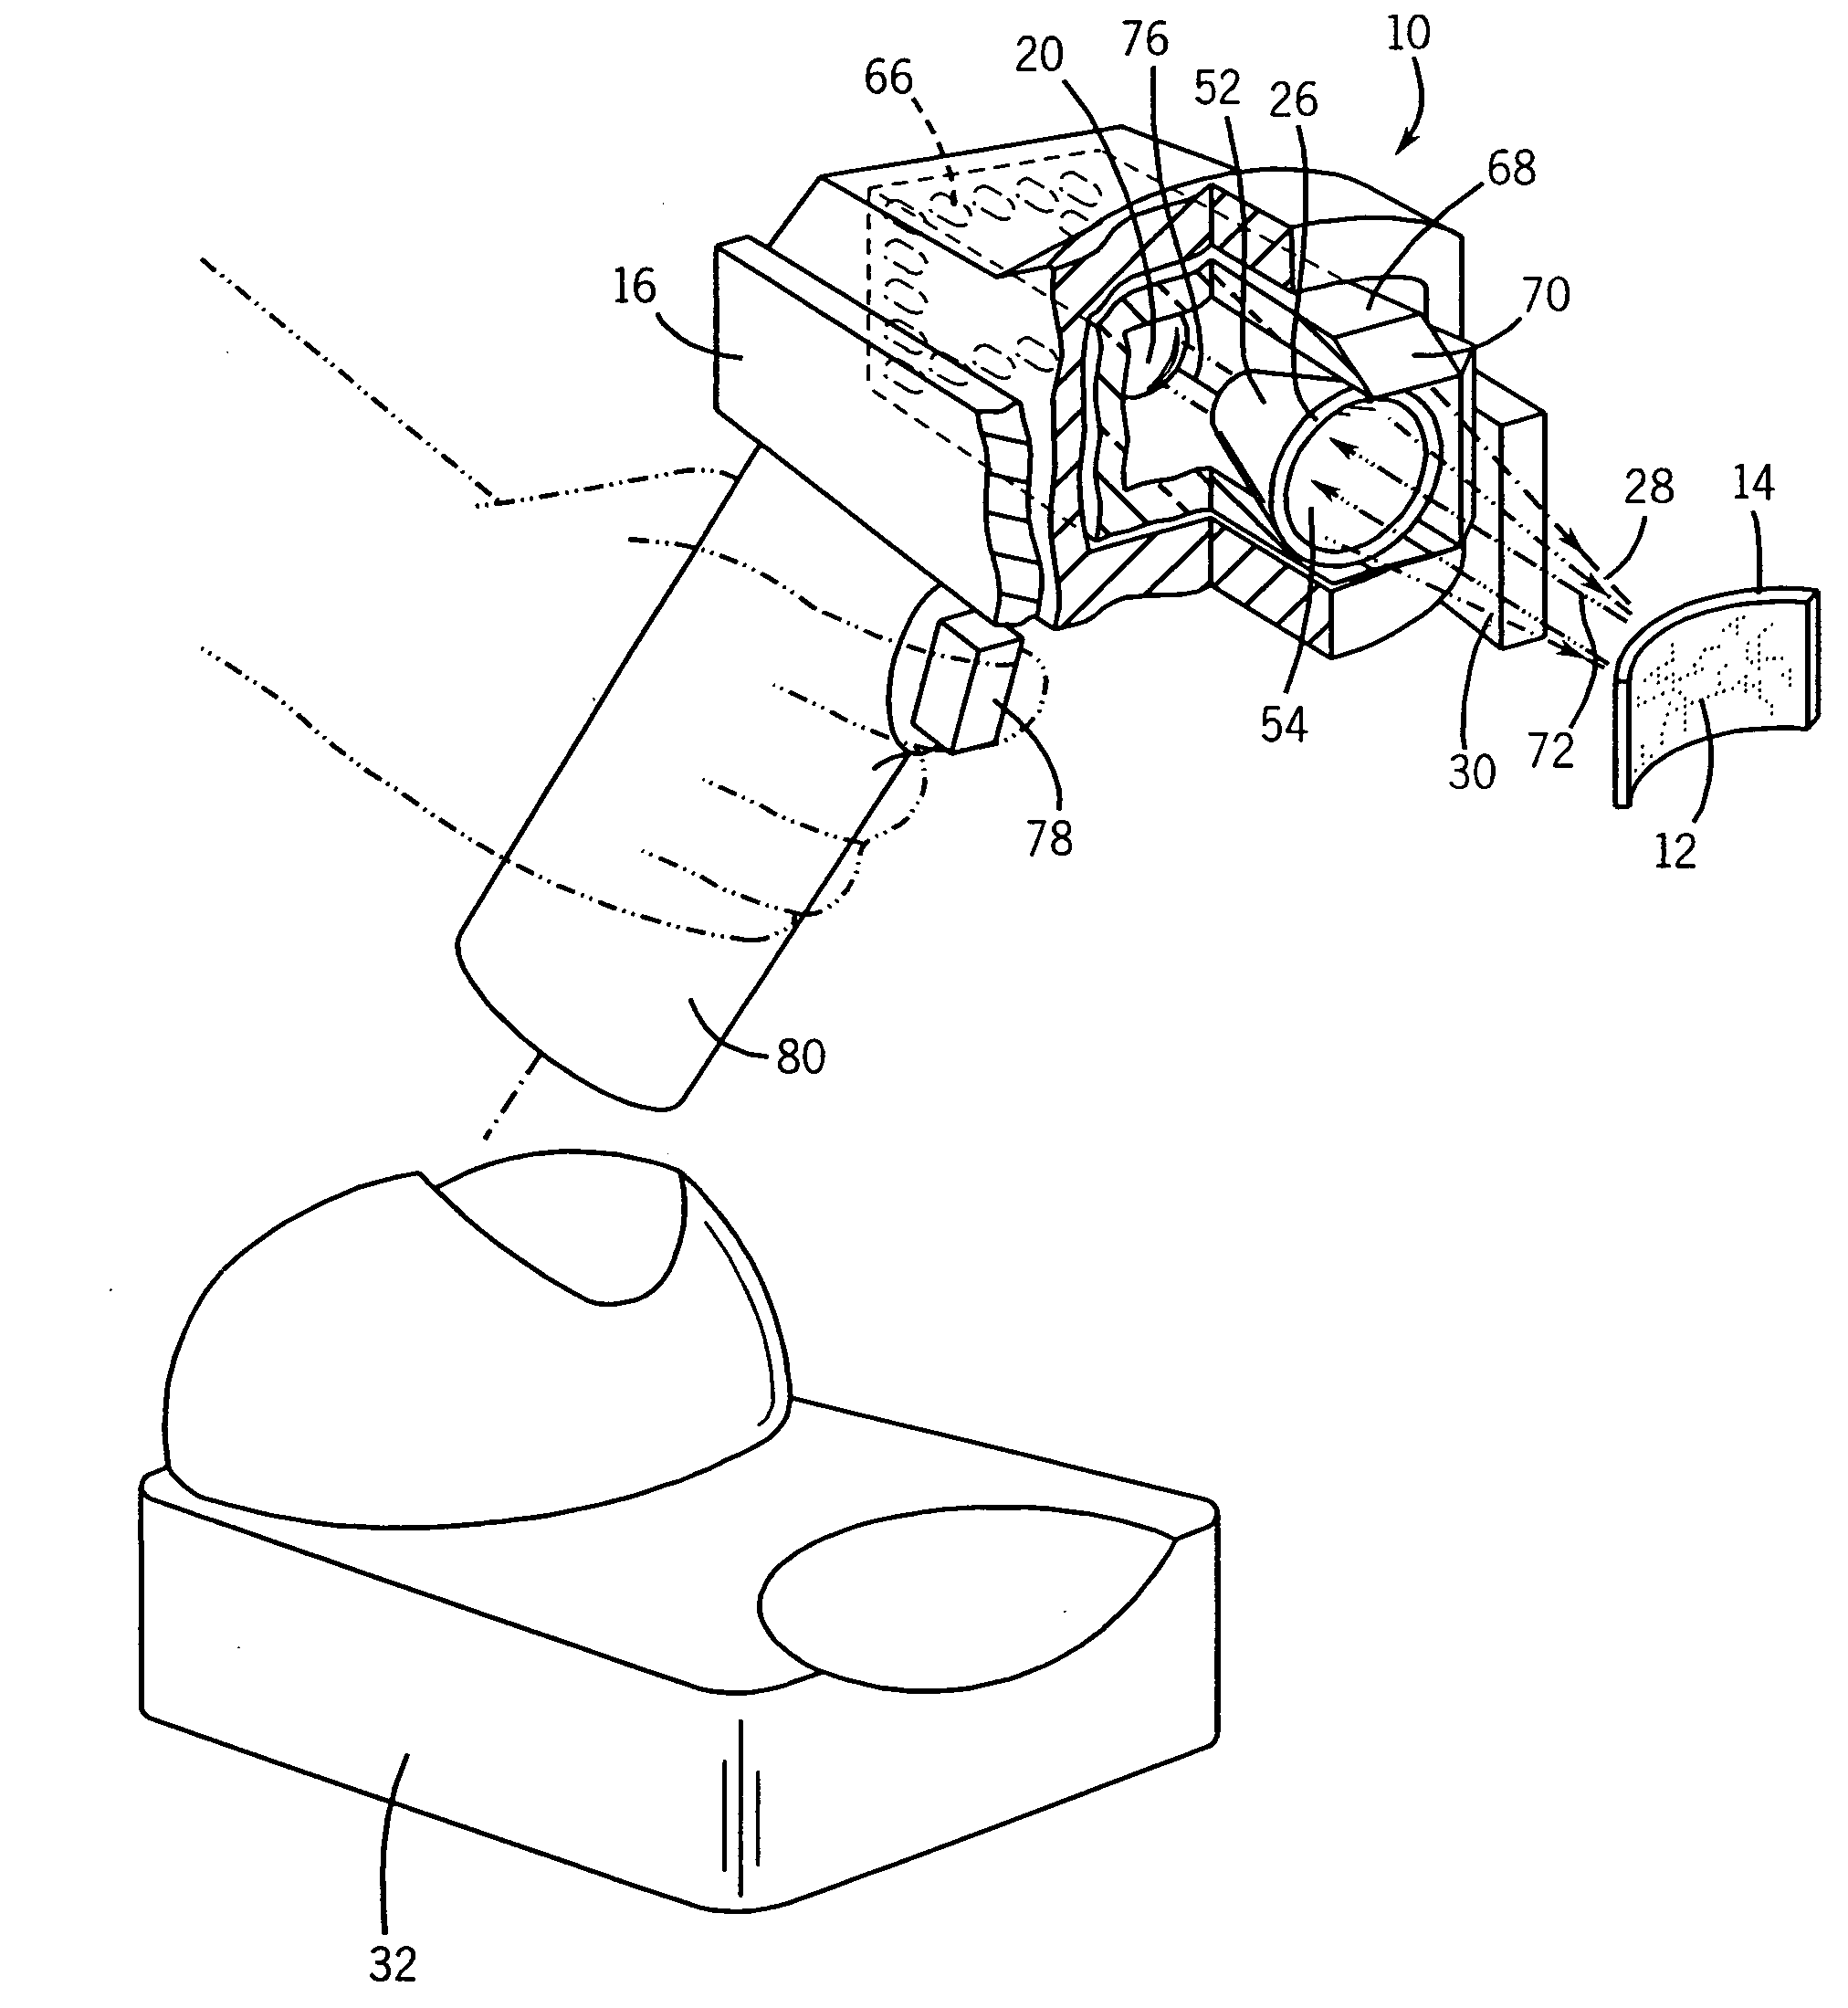 Illumination devices for image acquisition systems